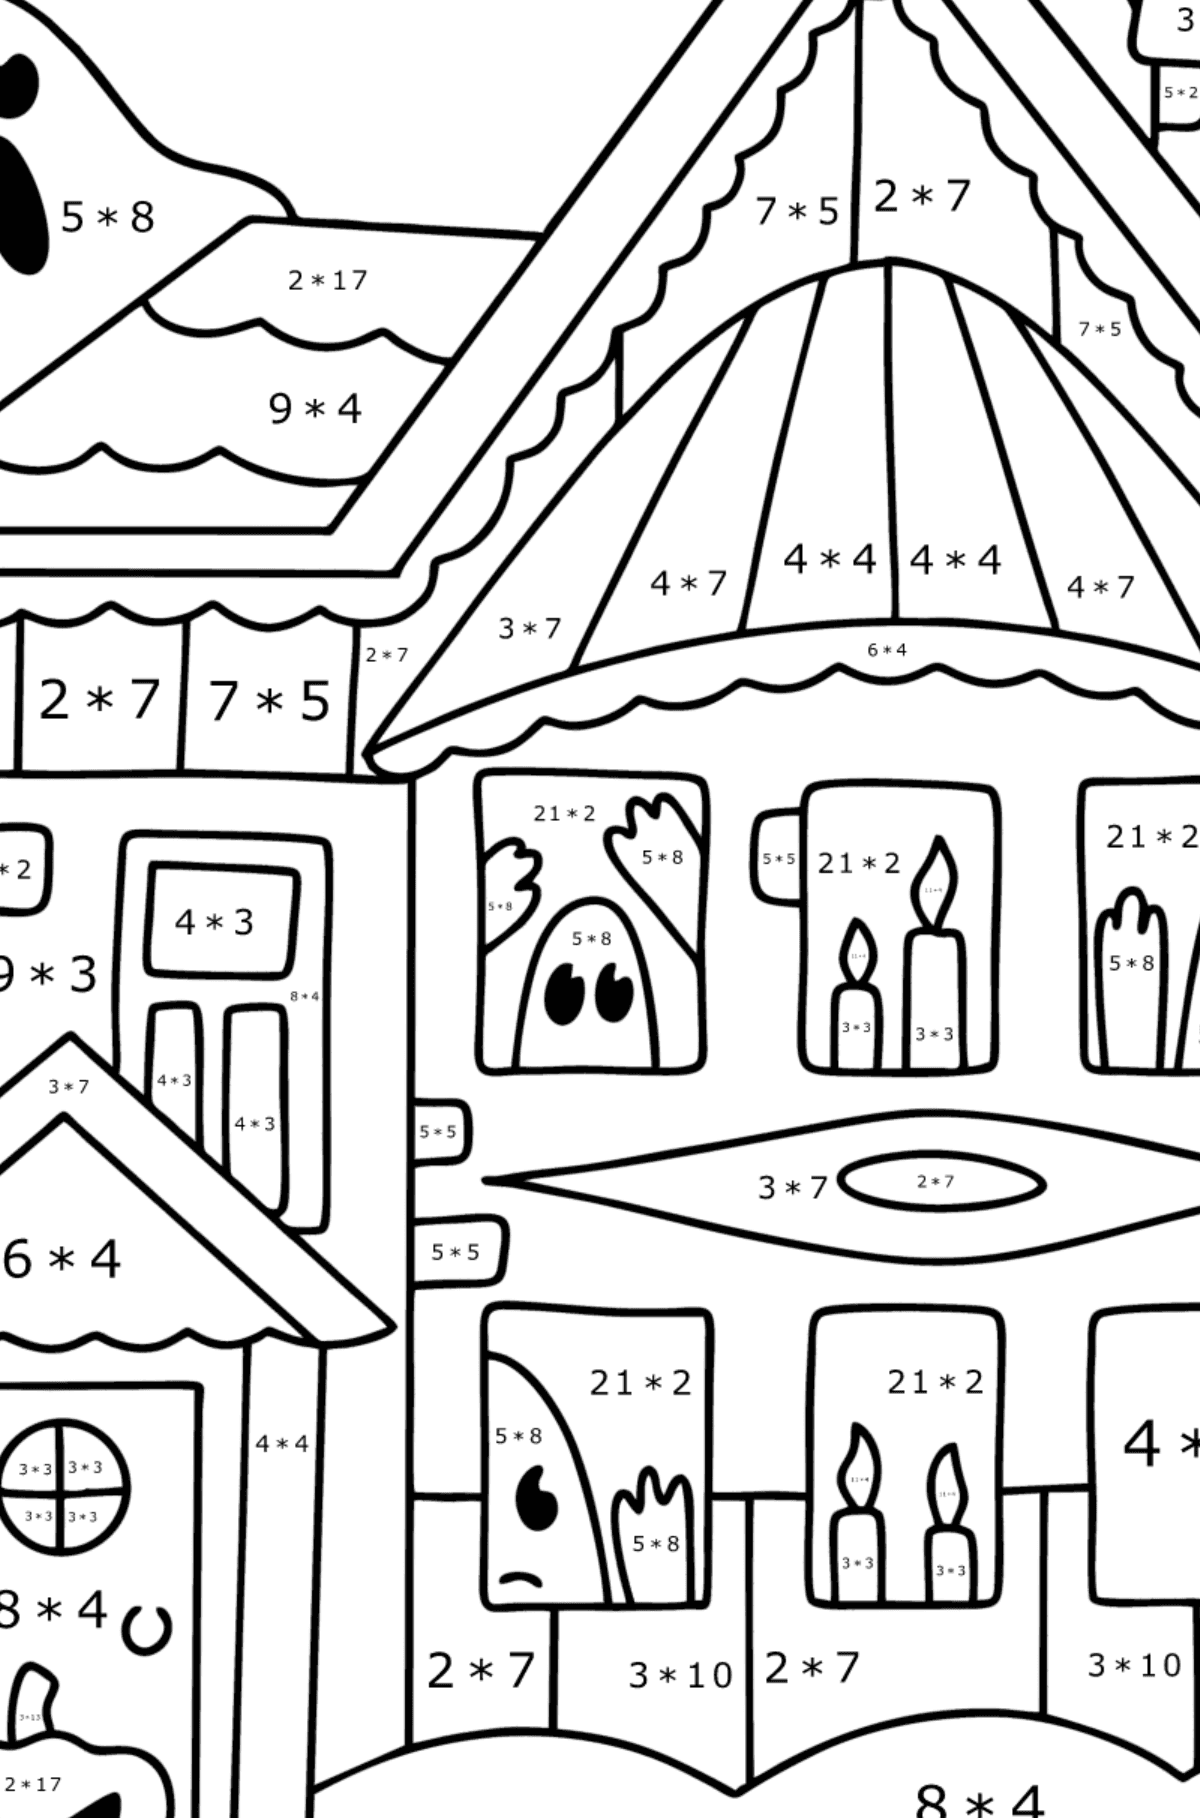 Haunted House coloring page - Math Coloring - Multiplication for Kids